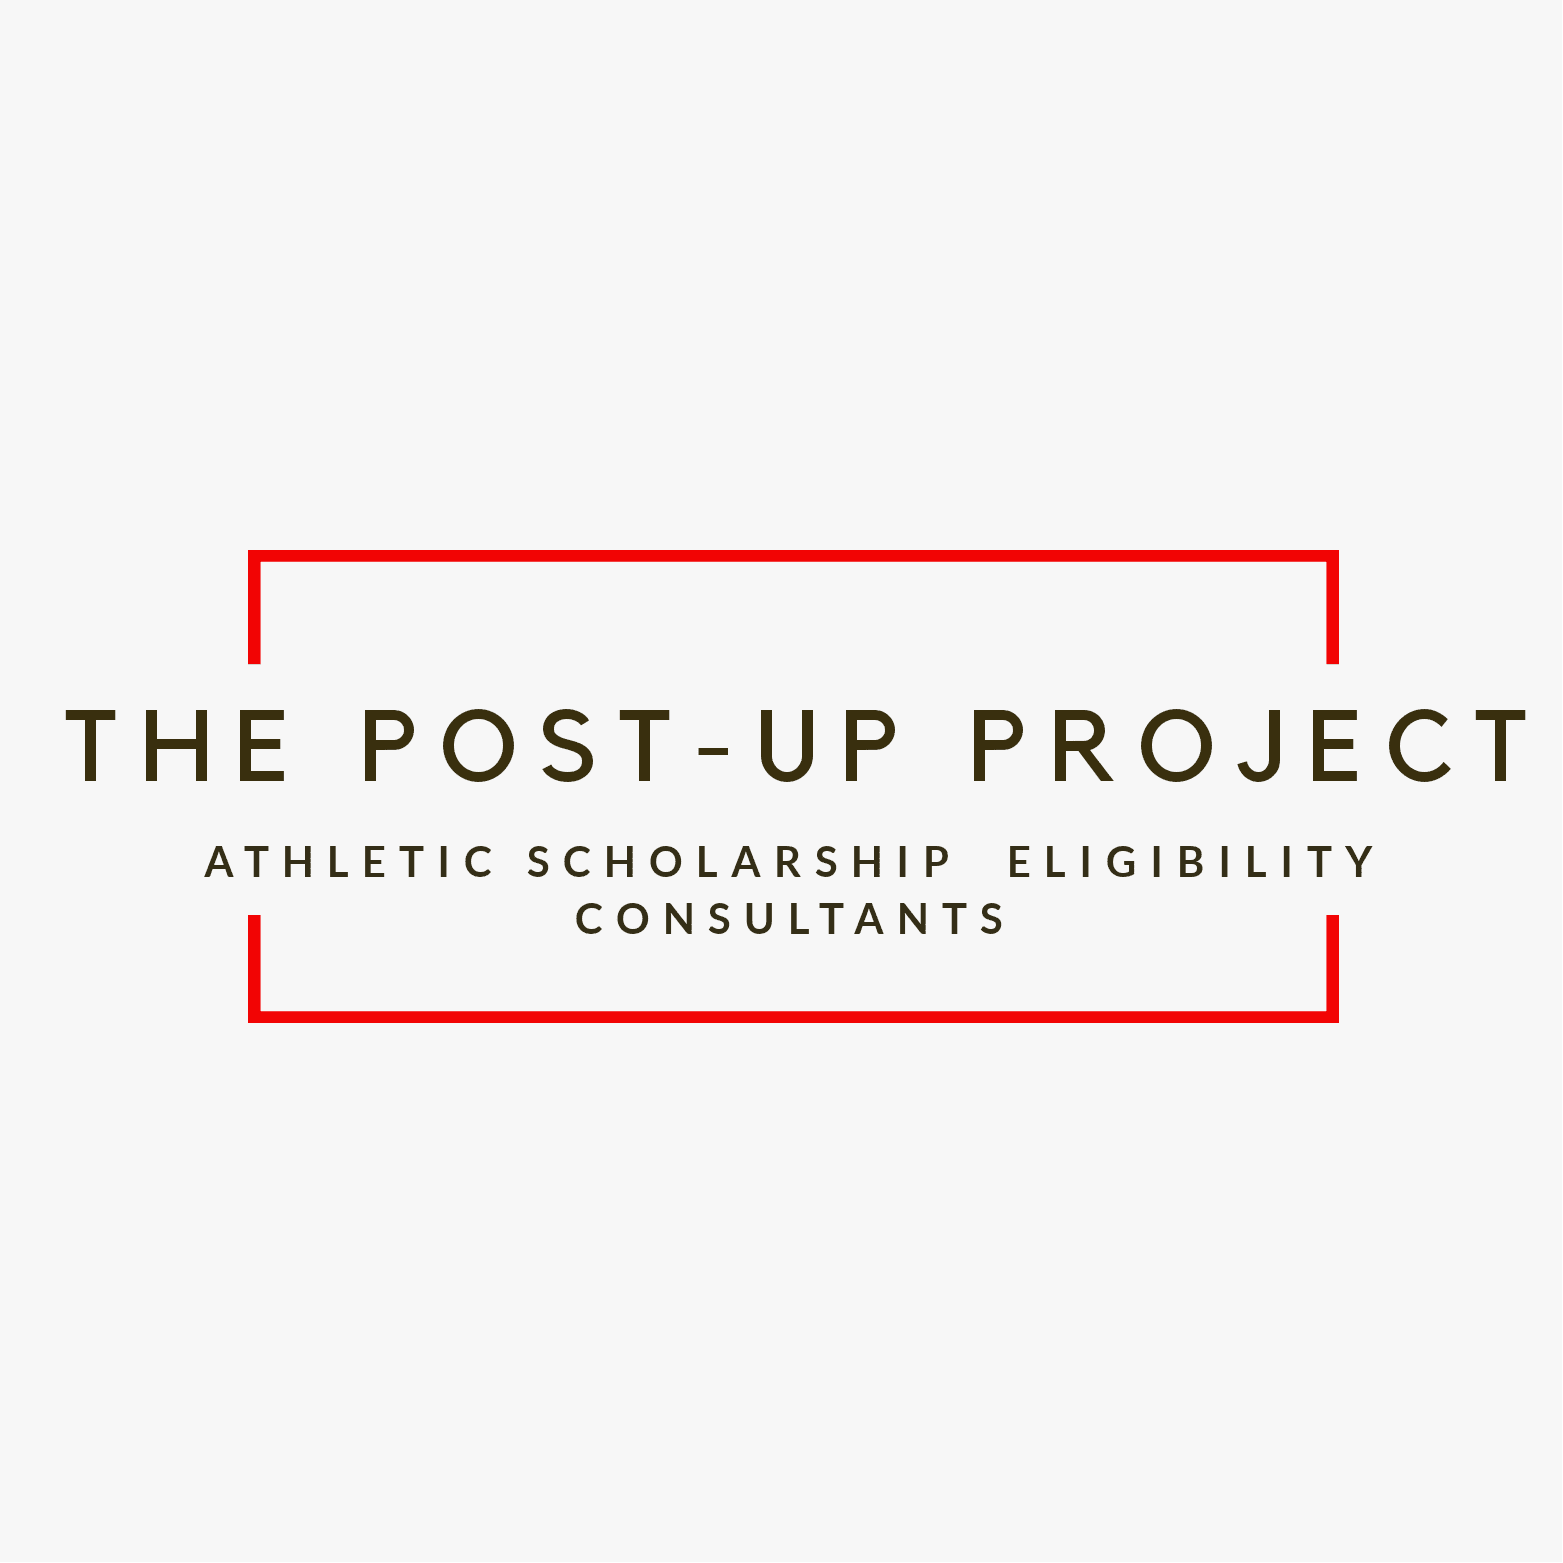 The Post-Up Project